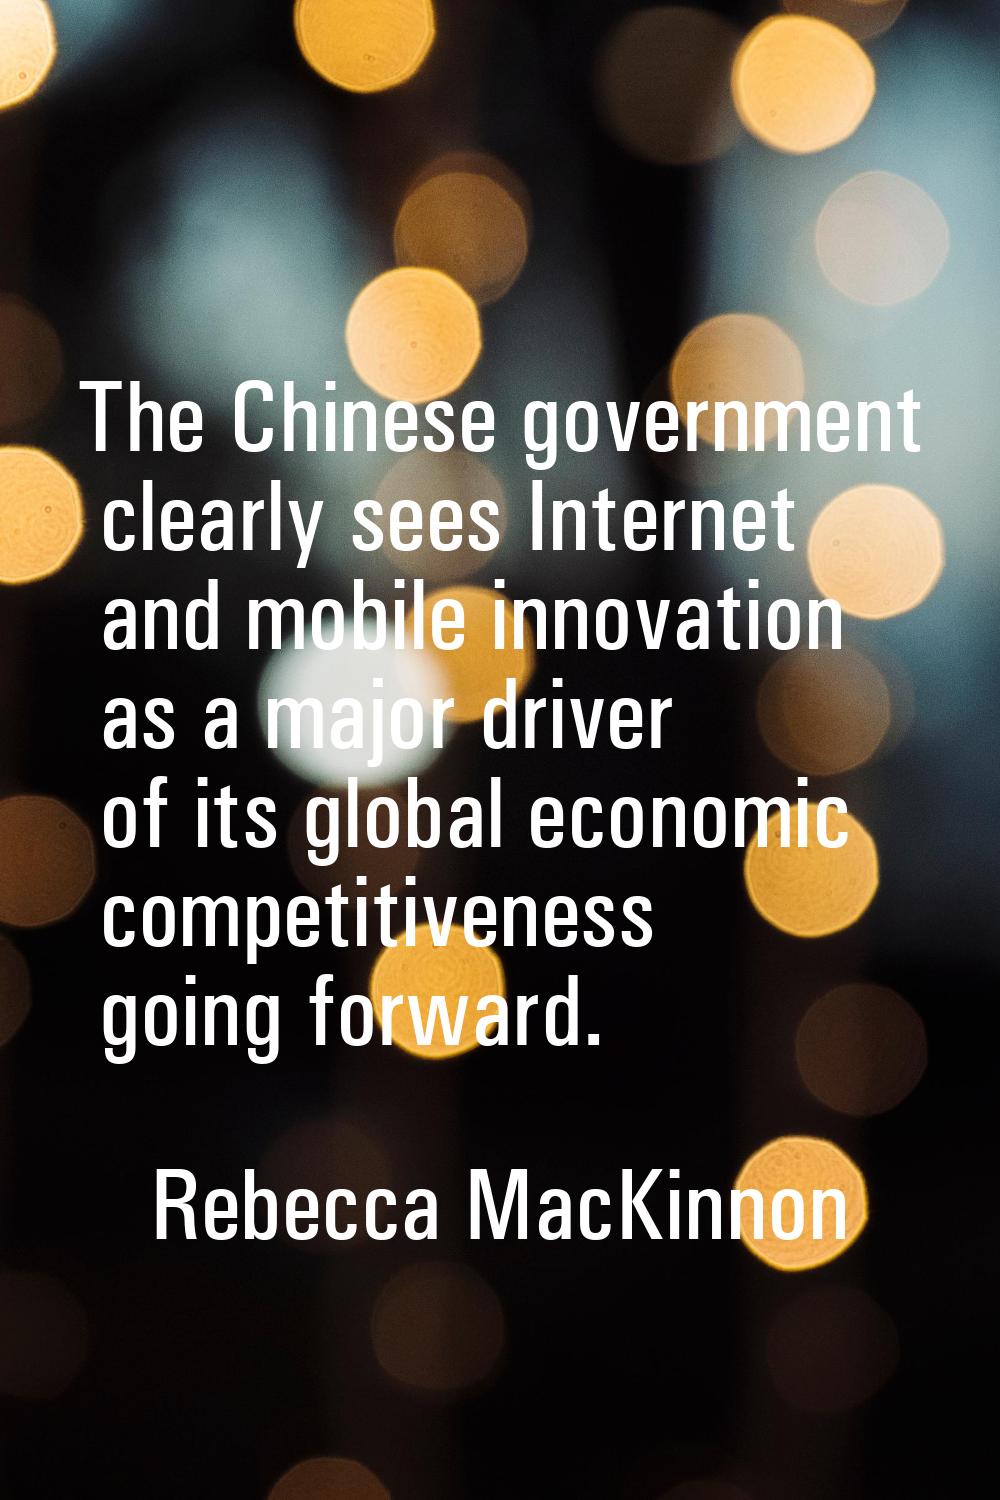 The Chinese government clearly sees Internet and mobile innovation as a major driver of its global 